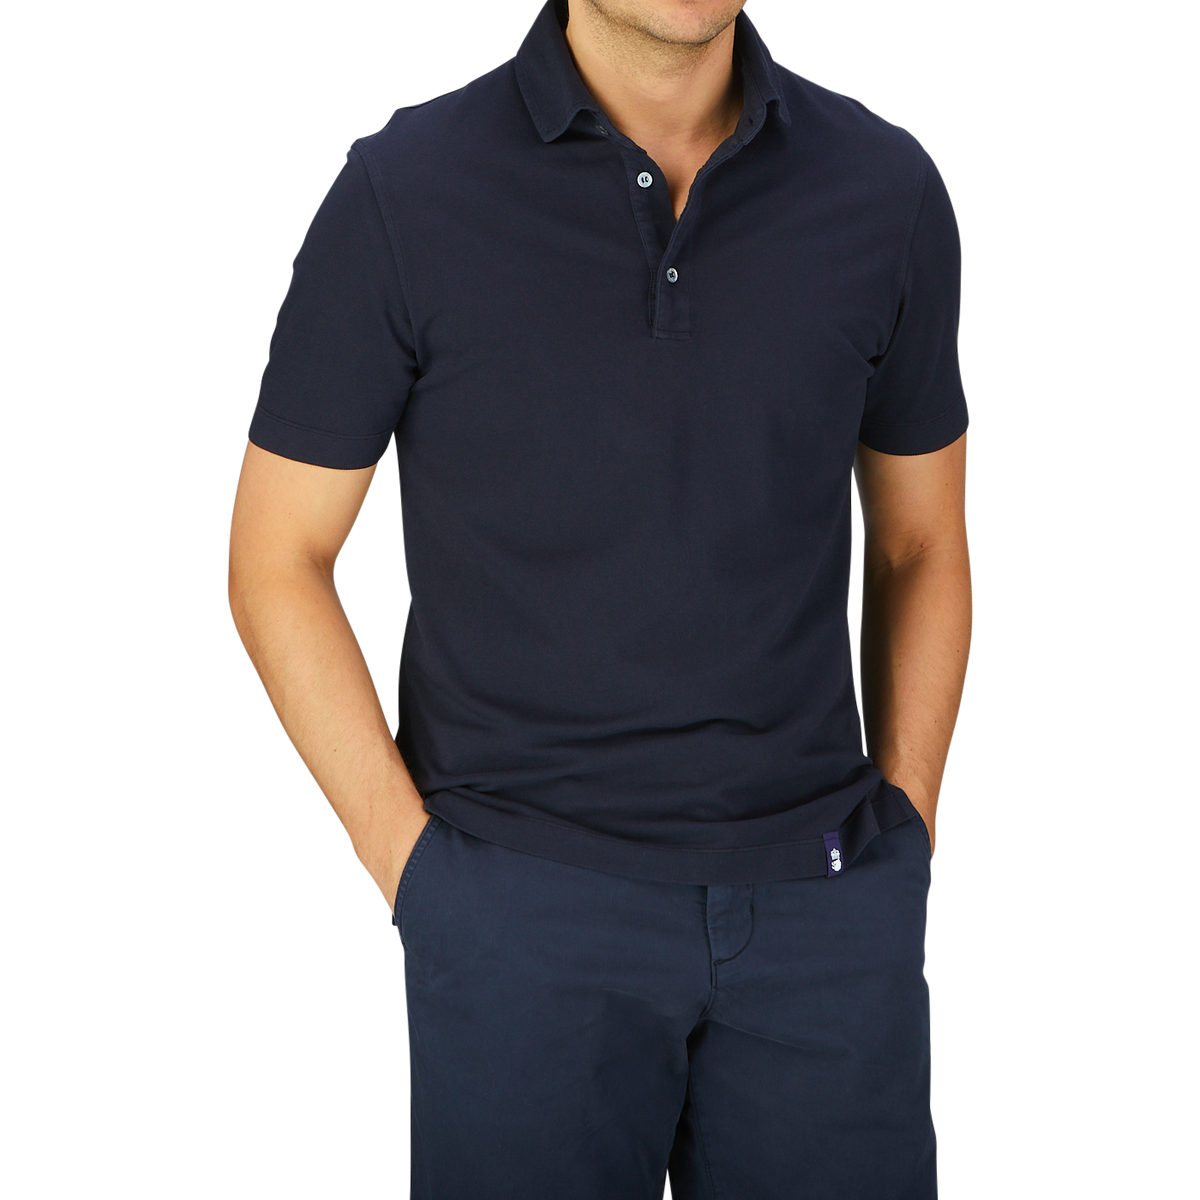 Man standing with hands on hips wearing a dark blue Drumohr Navy Blue Cotton Piquet Polo Shirt and navy trousers.